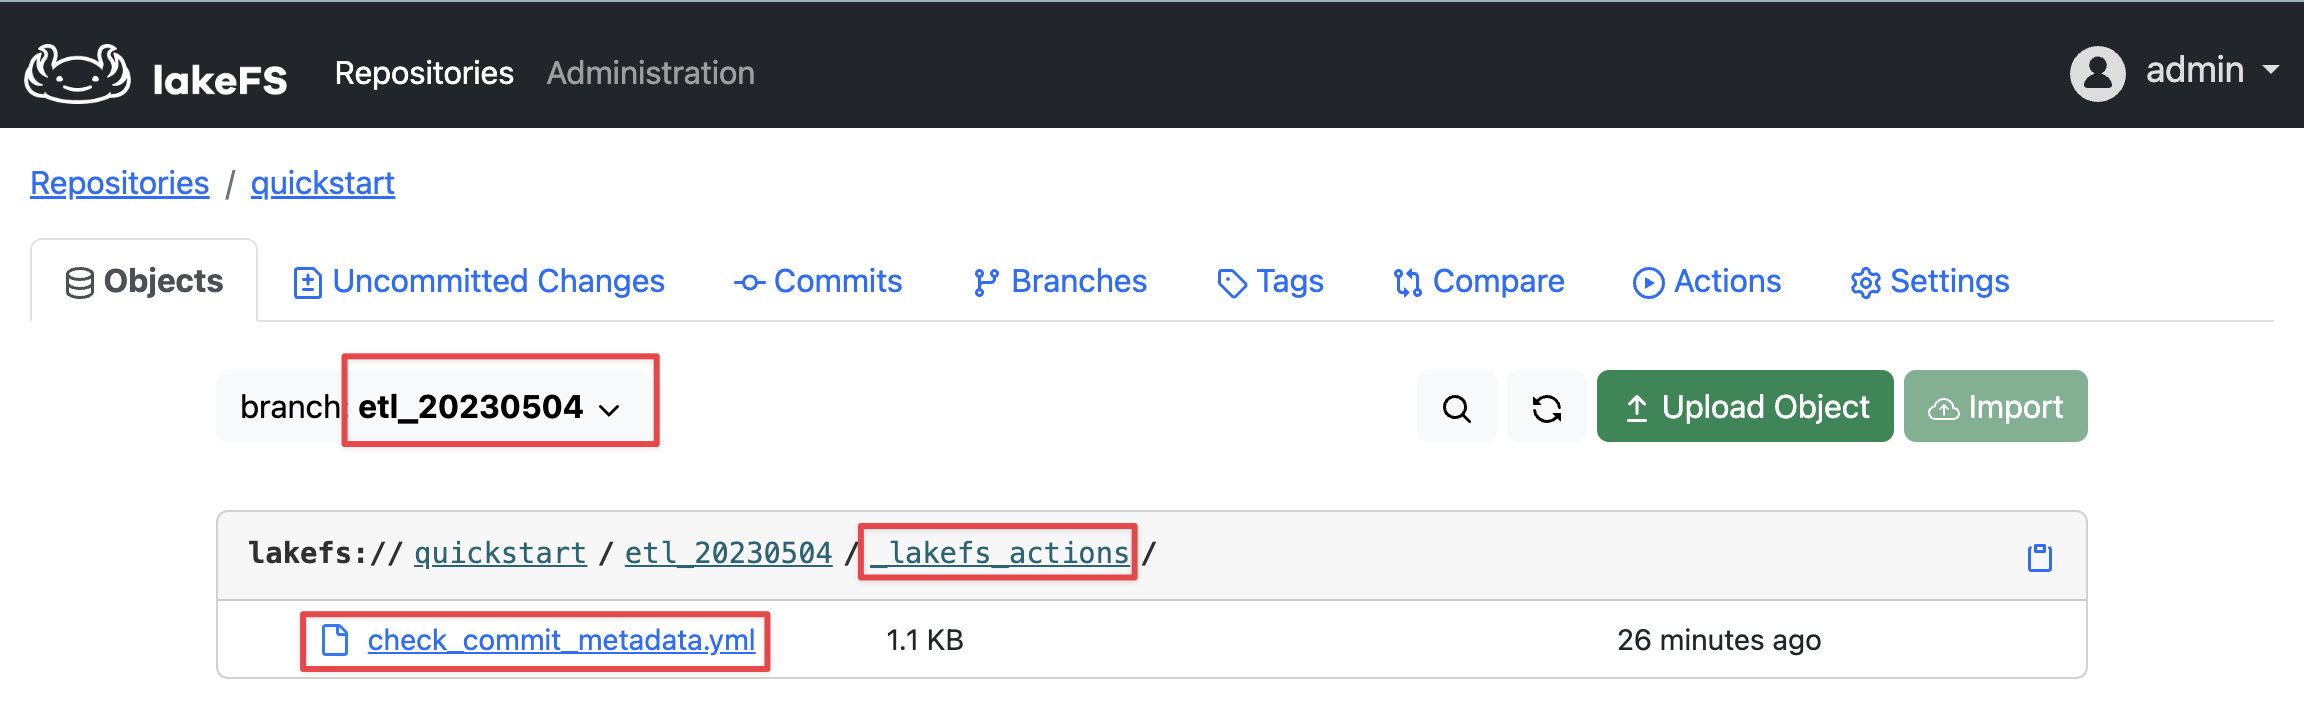 lakeFS branch etl_20230504 with object /_lakefs_actions/check_commit_metadata.yml